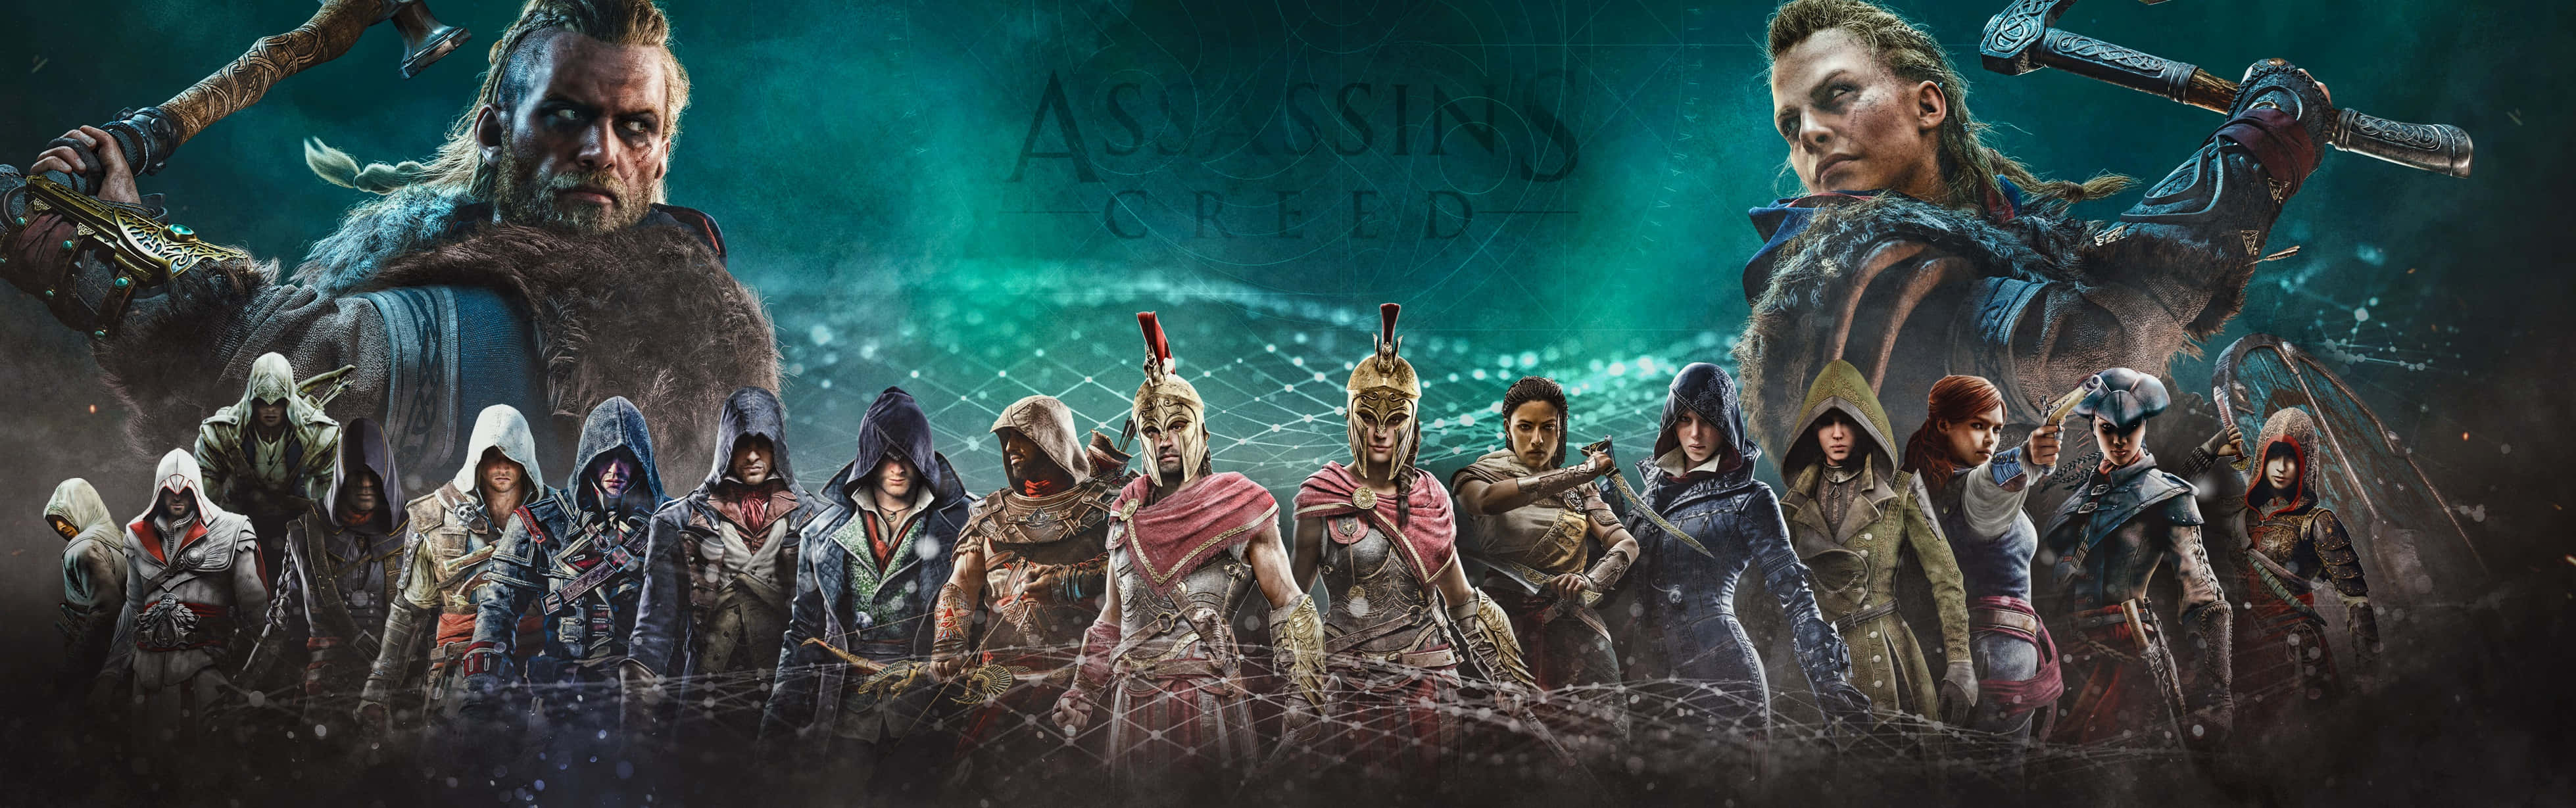 Iconic Assassin's Creed Characters United Wallpaper